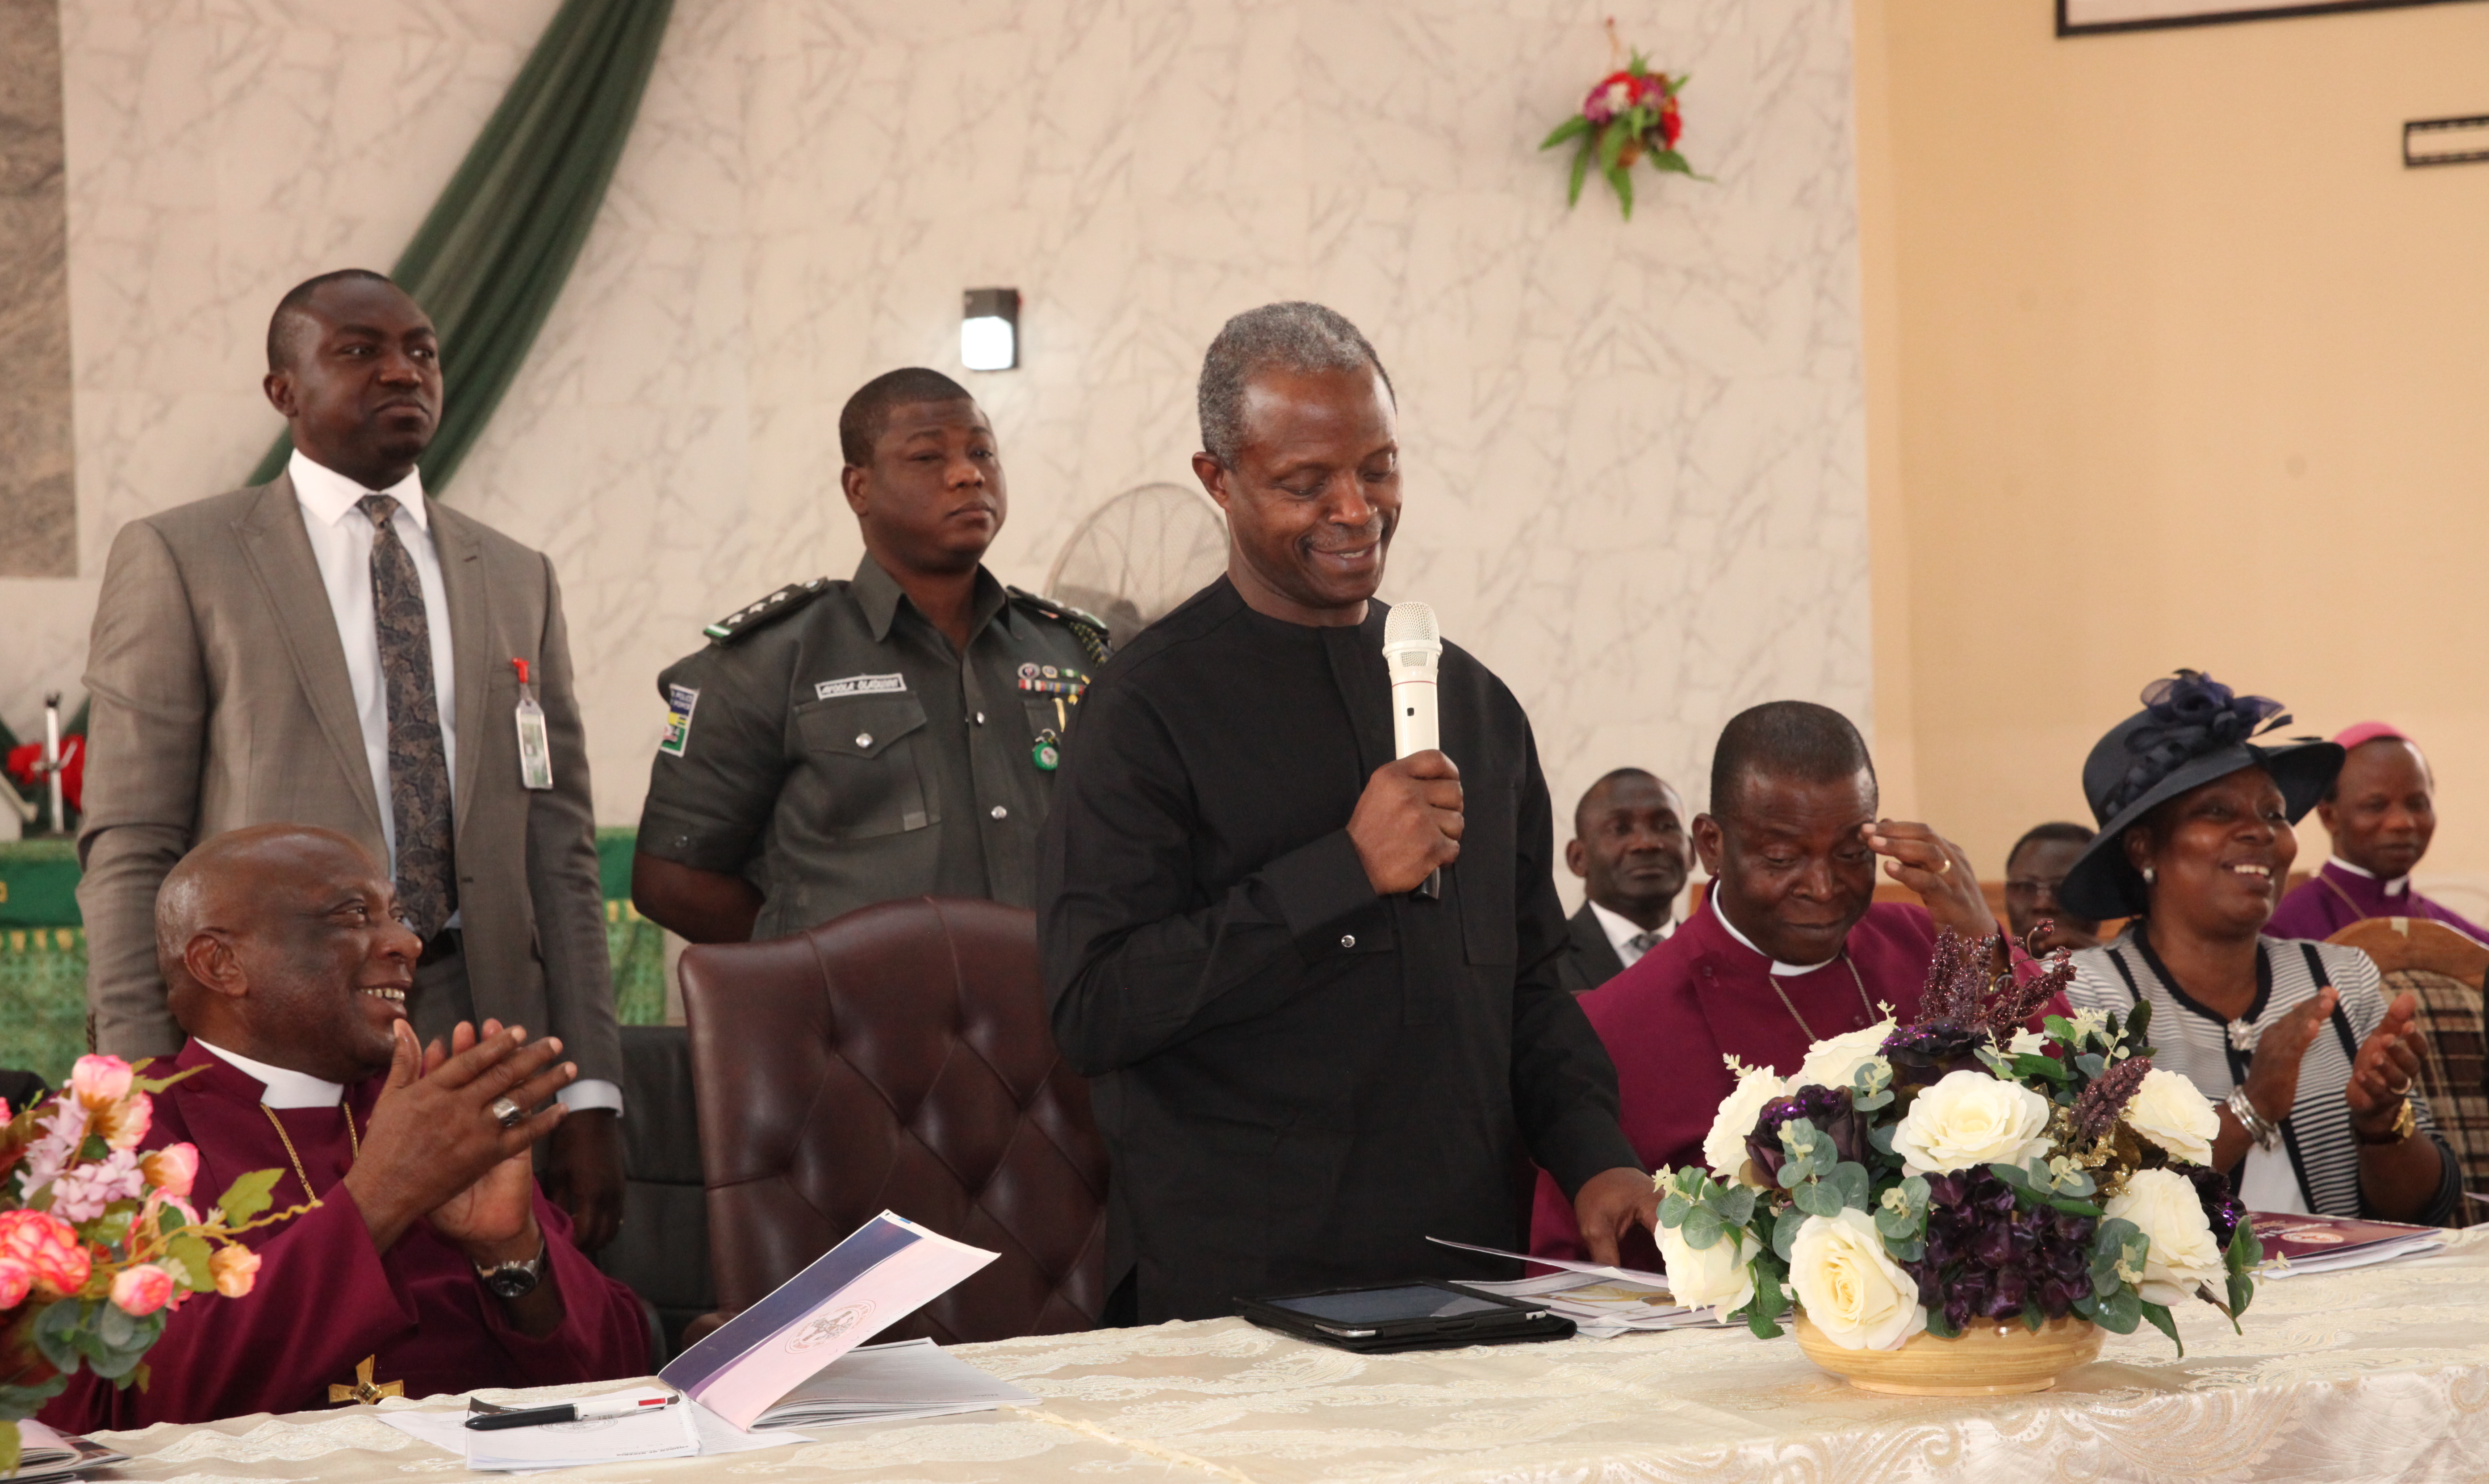 VP Osinbajo Attends The Church Of Nigeria (Anglican Communion) Standing Committee Meeting On 04/02/2016